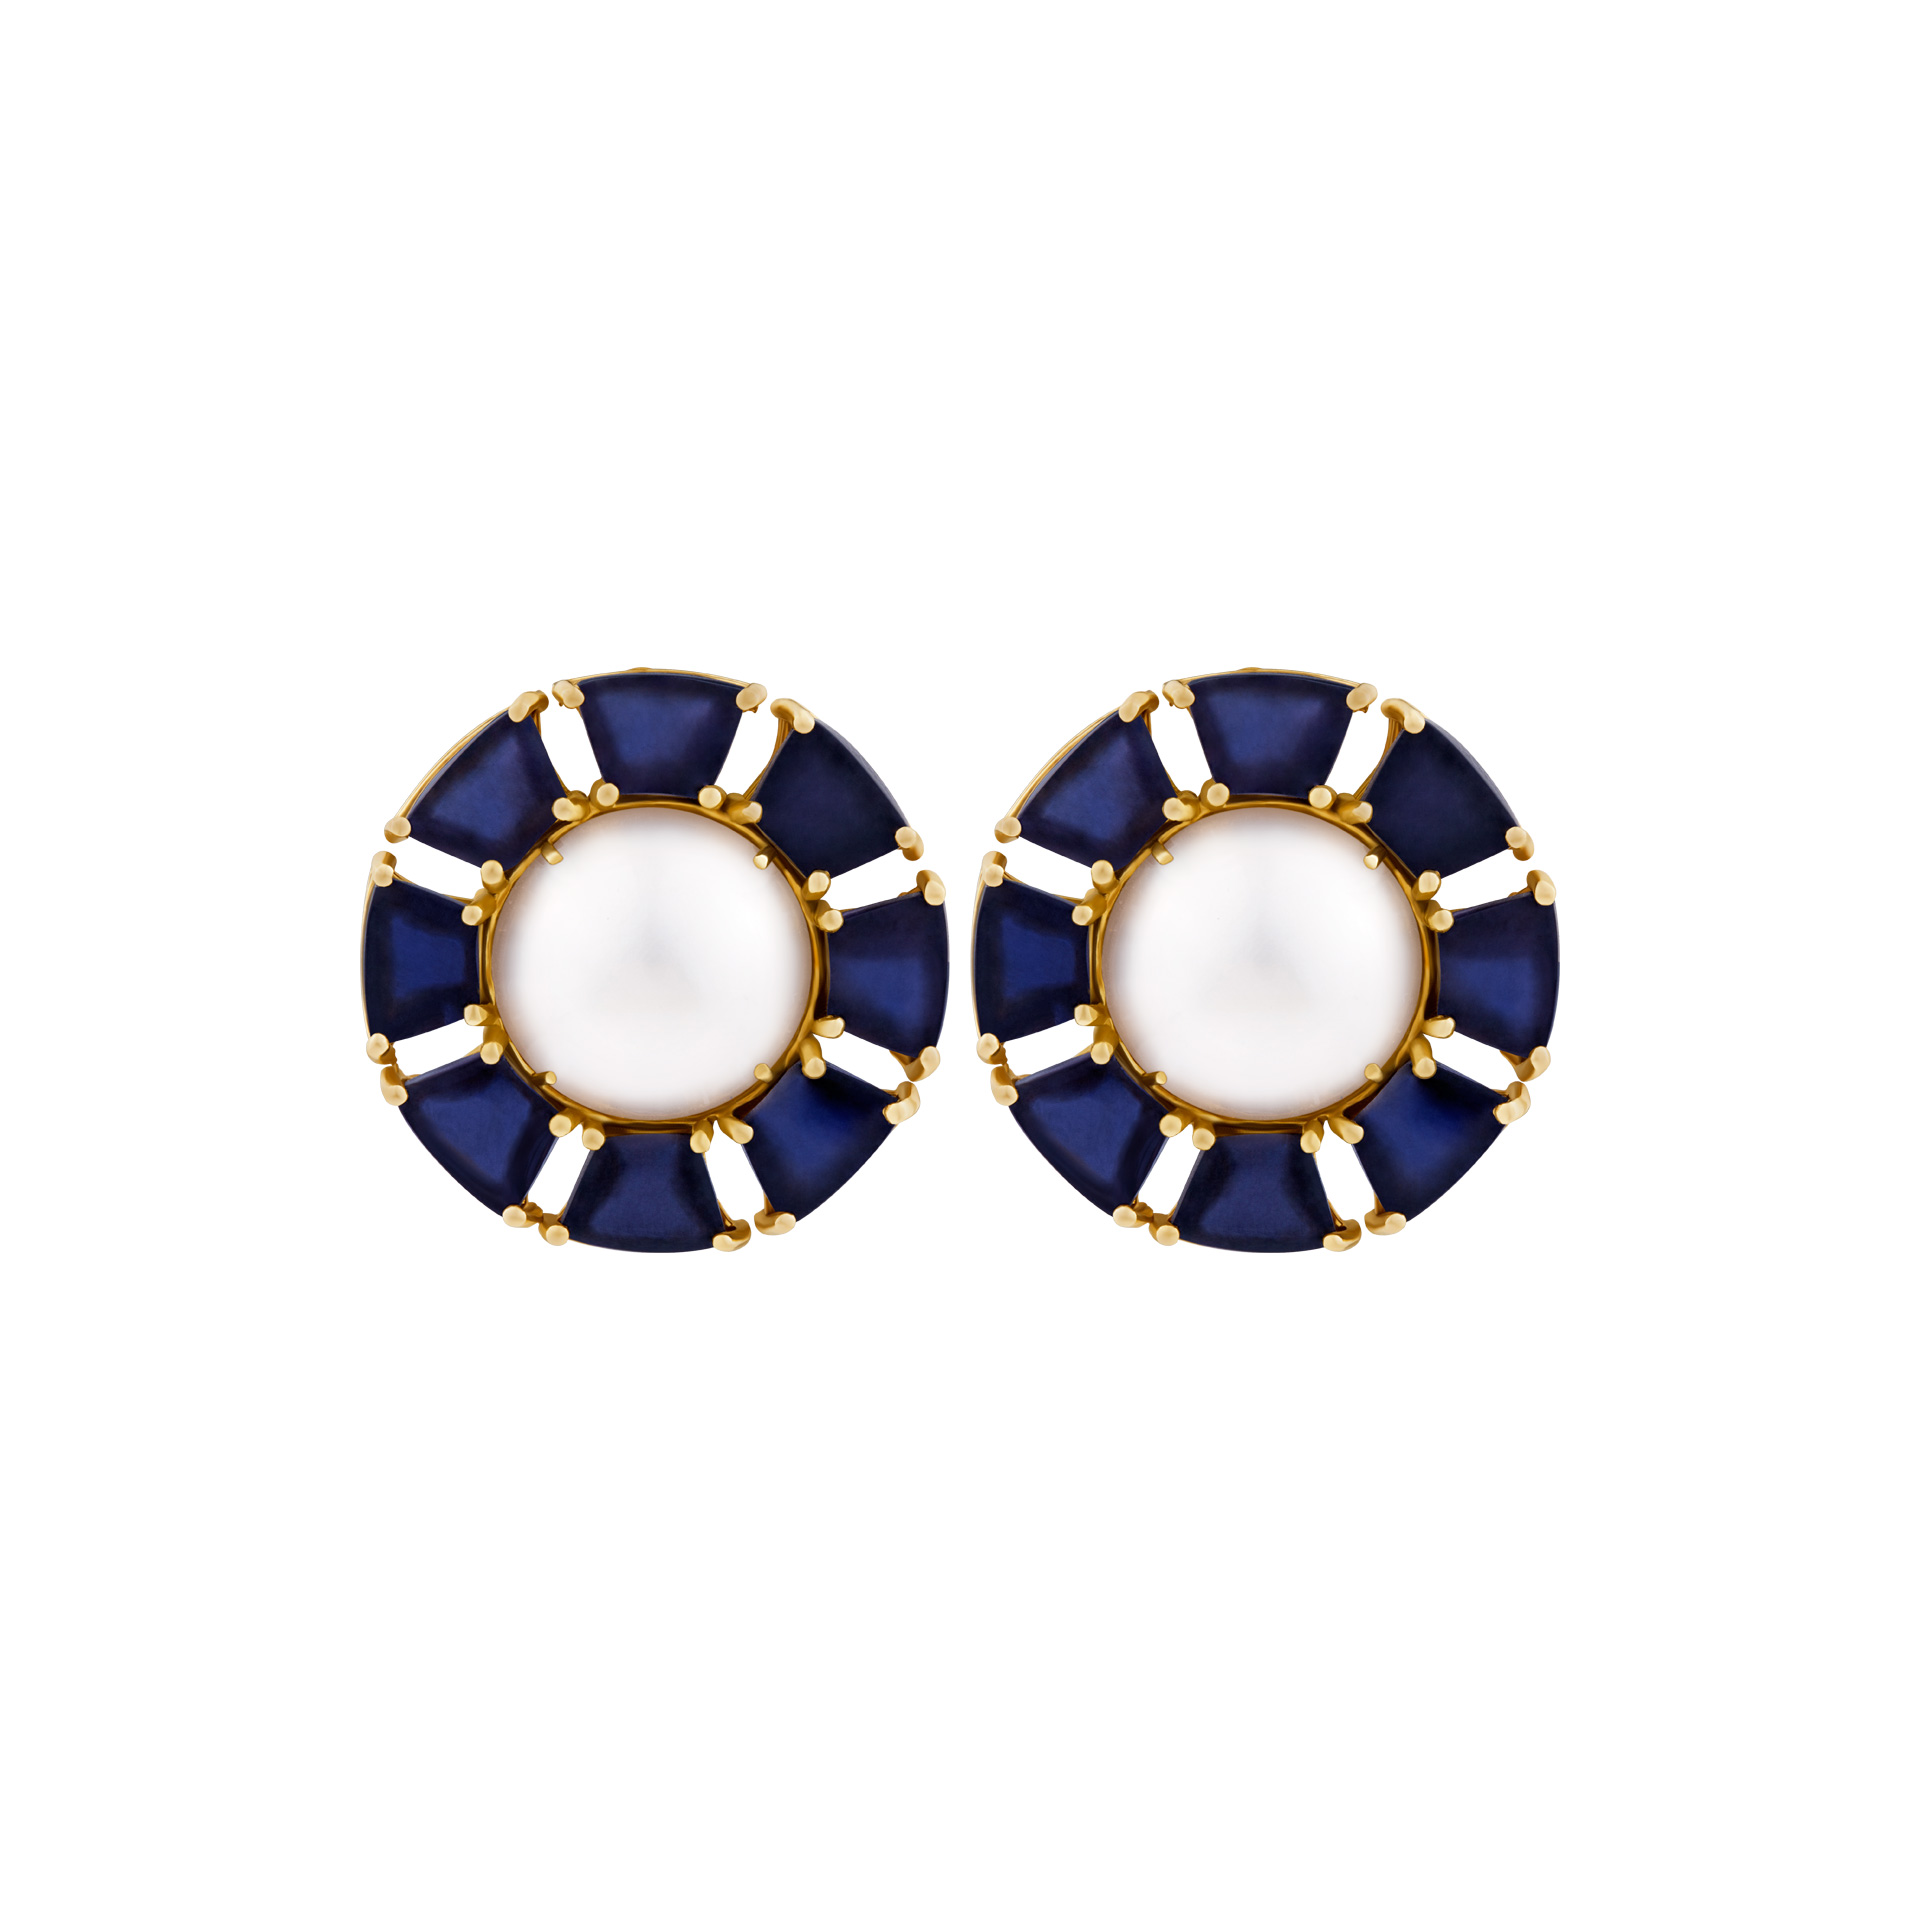 Iolite and Mobe Pearl cufflinks in 14k yellow gold